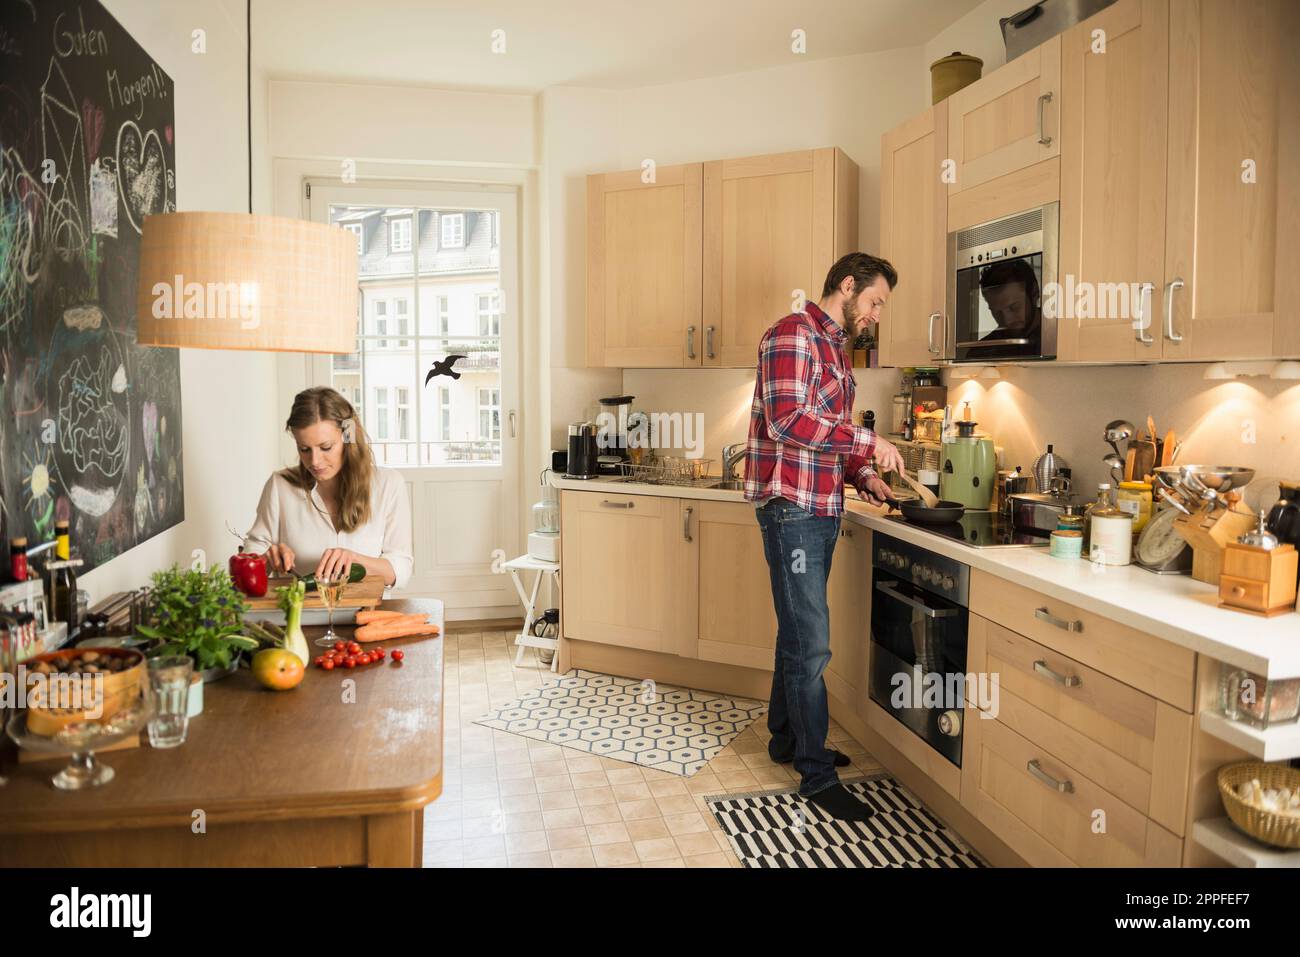 Couple in kitchen and preparing food, Munich, Bavaria, Germany Stock Photo